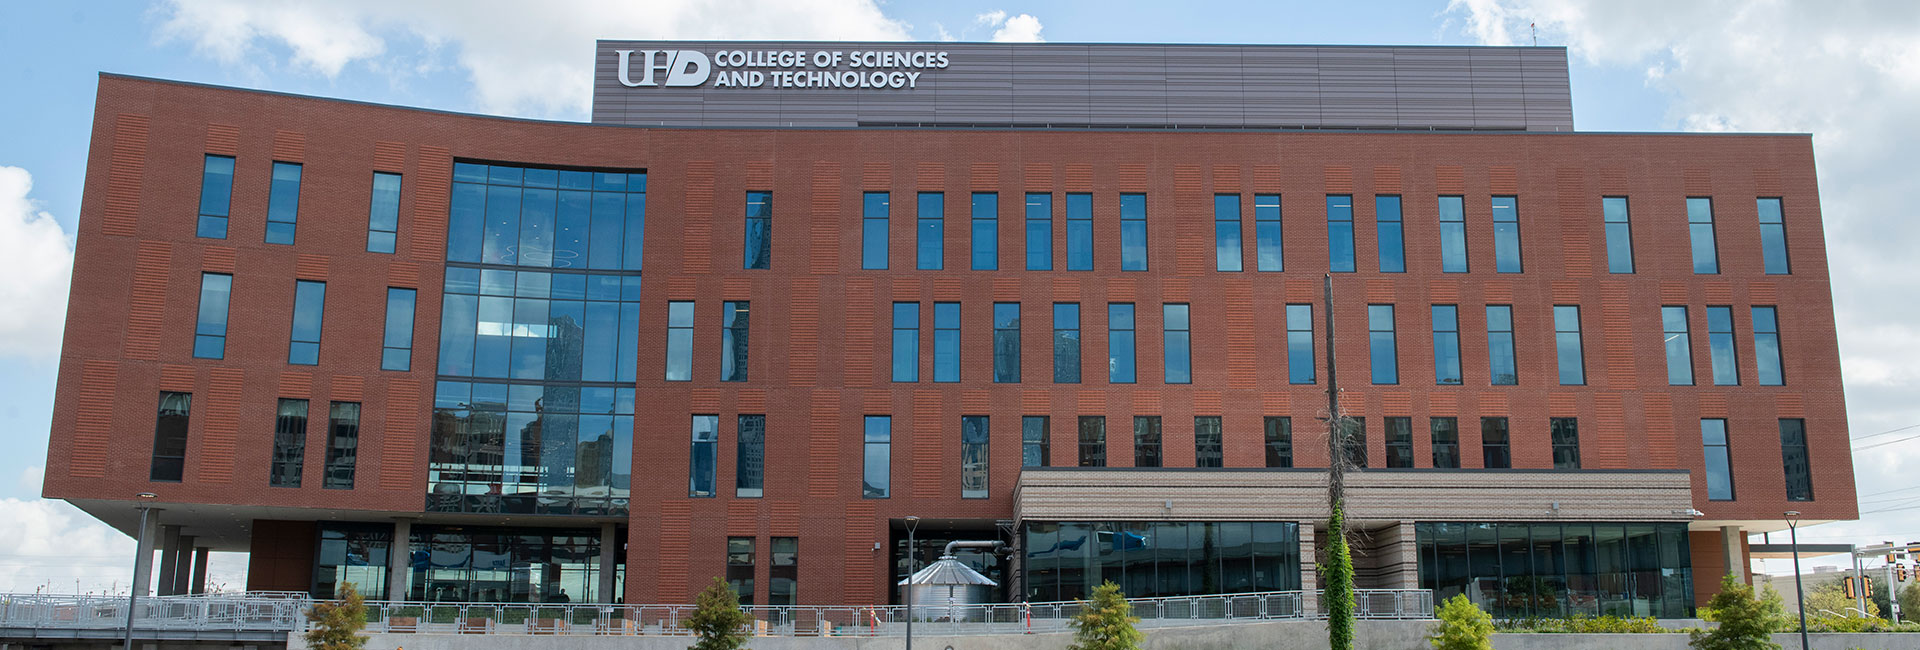 Goal 5 Banner: College of Sciences and Technology Building.